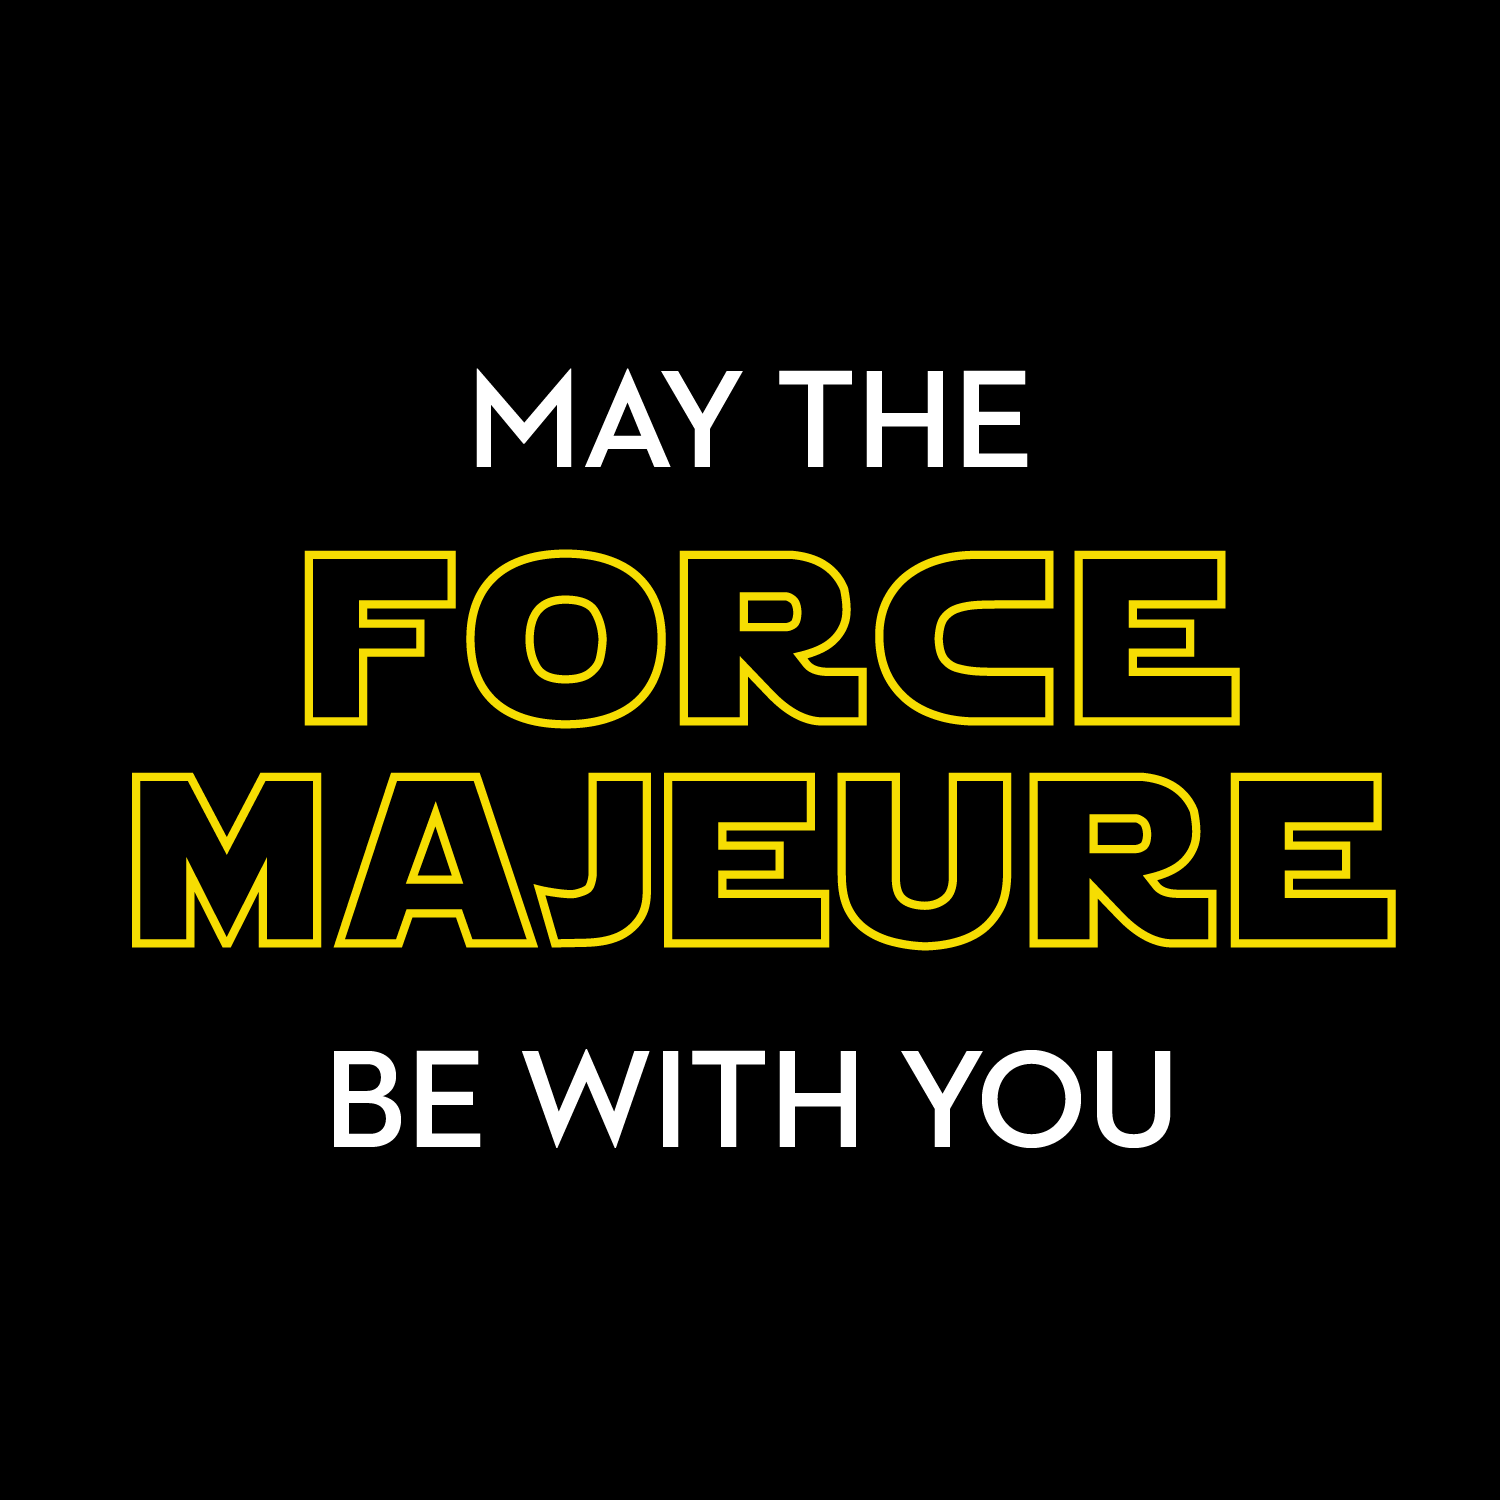 May the Force Majeure Be With You